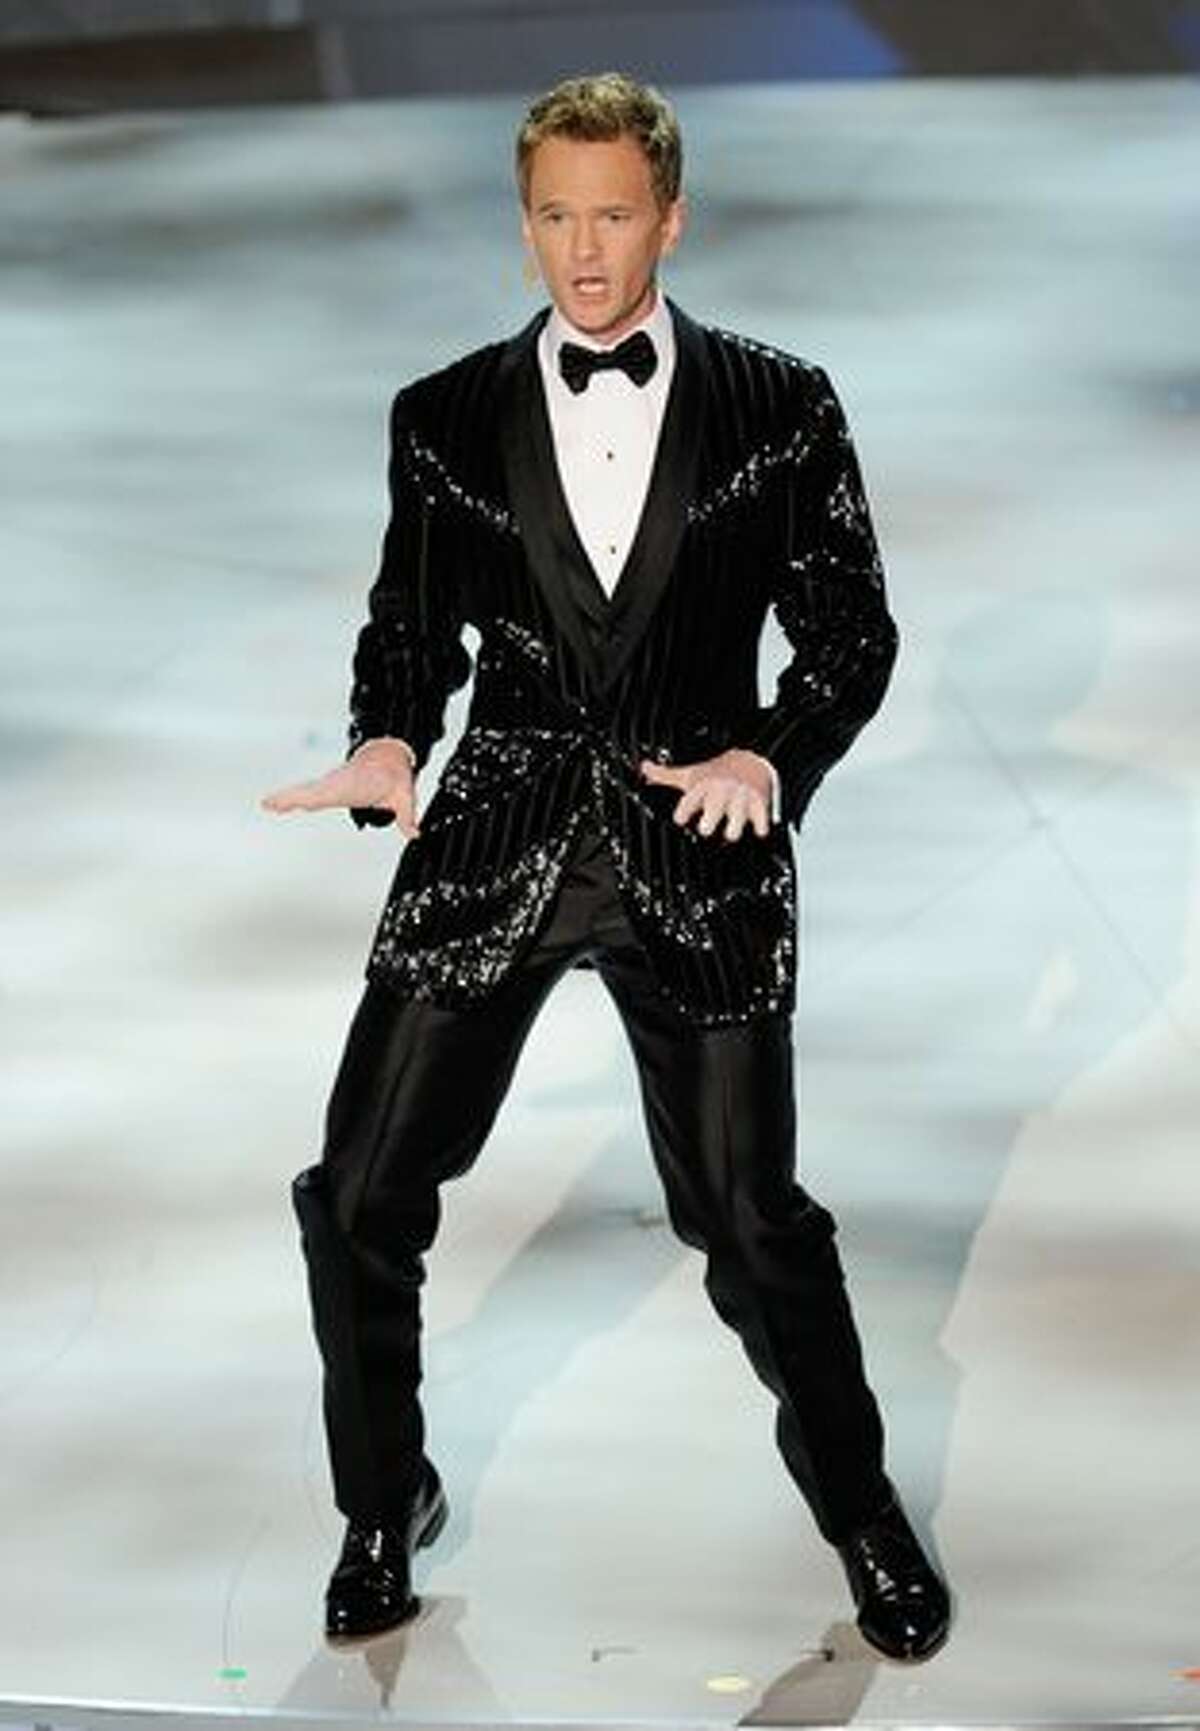 Actor Neil Patrick Harris performs onstage during the 82nd Annual Academy Awards held at Kodak Theatre in Hollywood, California.